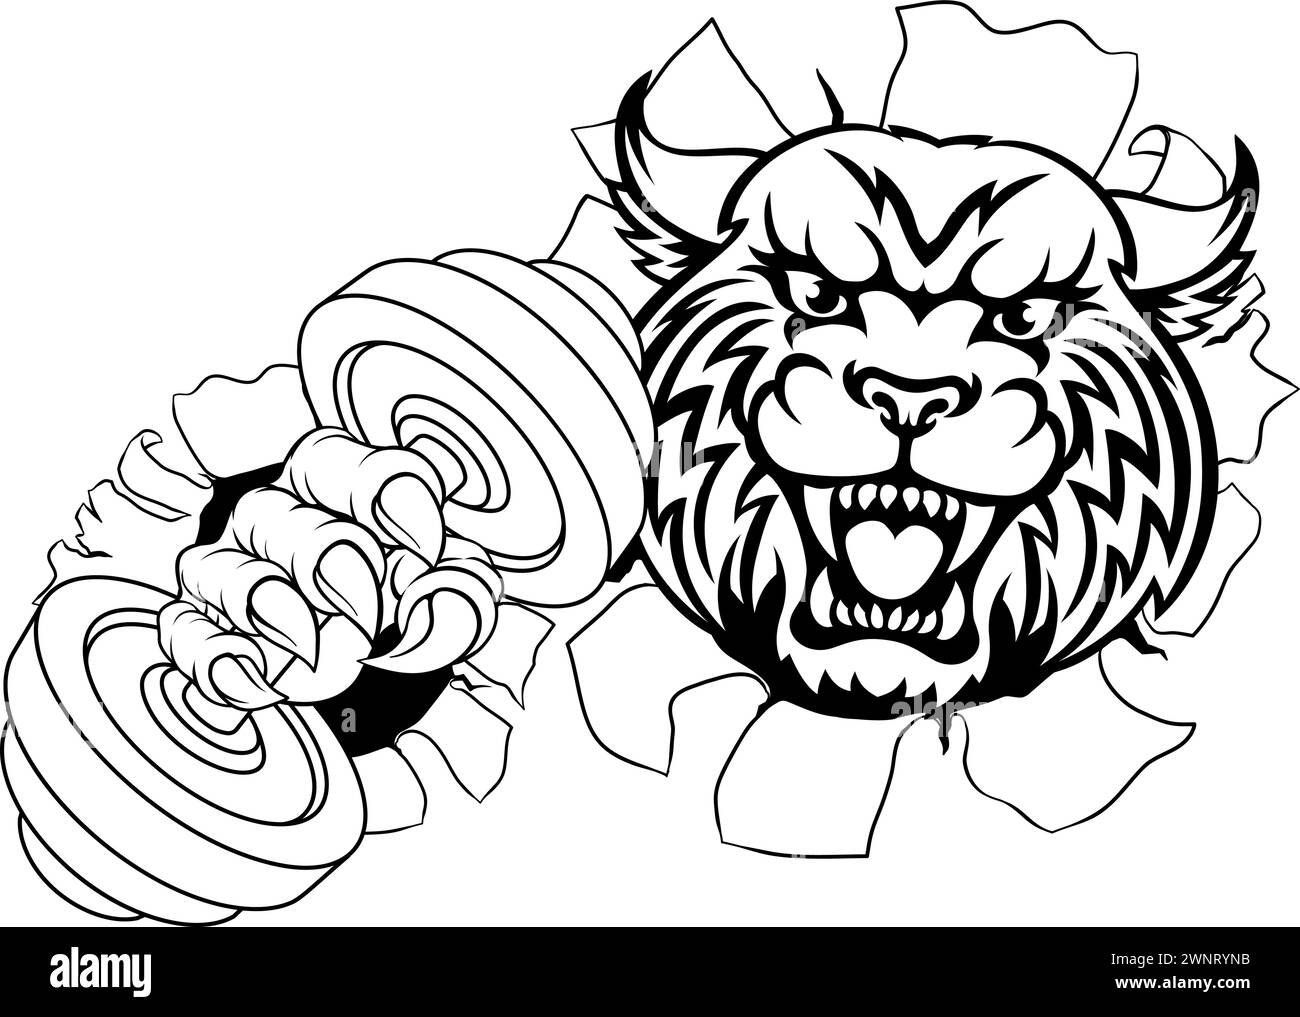 Wildcat Cougar Lynx Lion Weight Lifting Gym Mascot Stock Vector